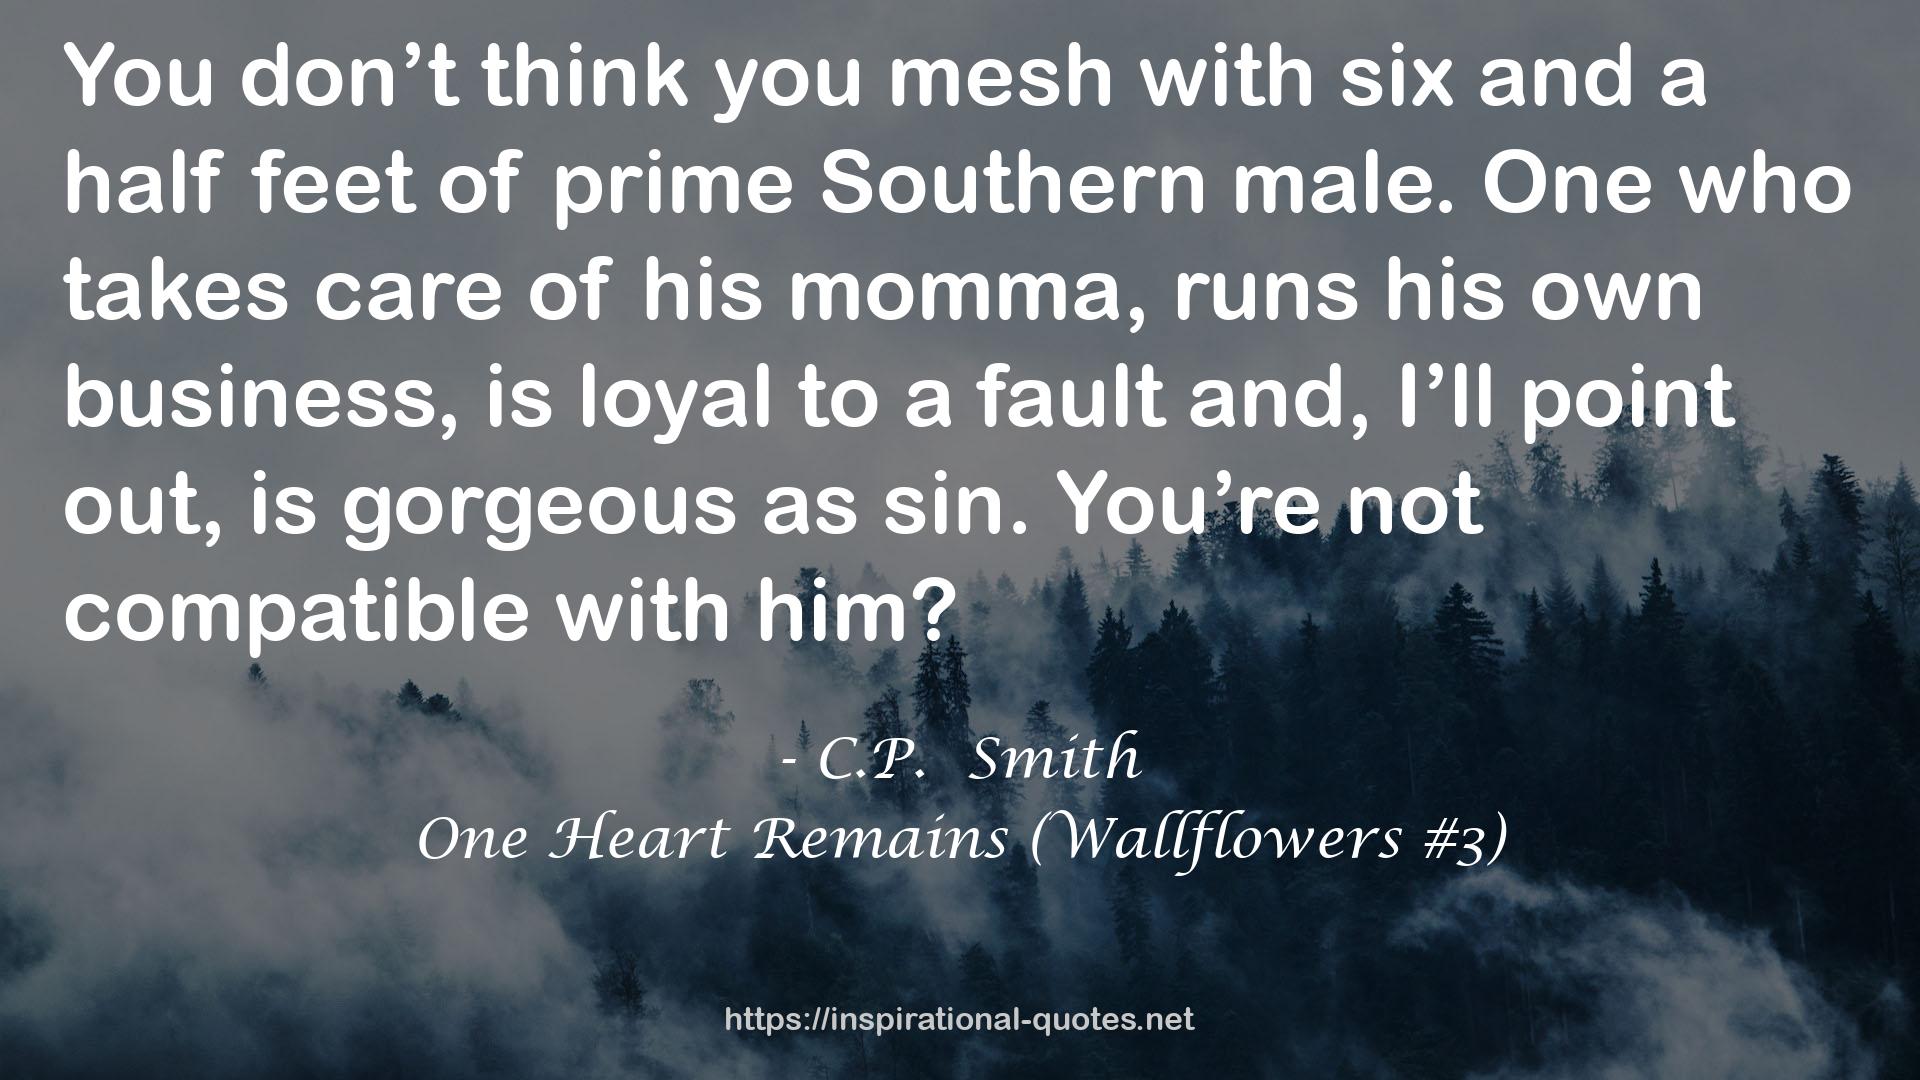 One Heart Remains (Wallflowers #3) QUOTES